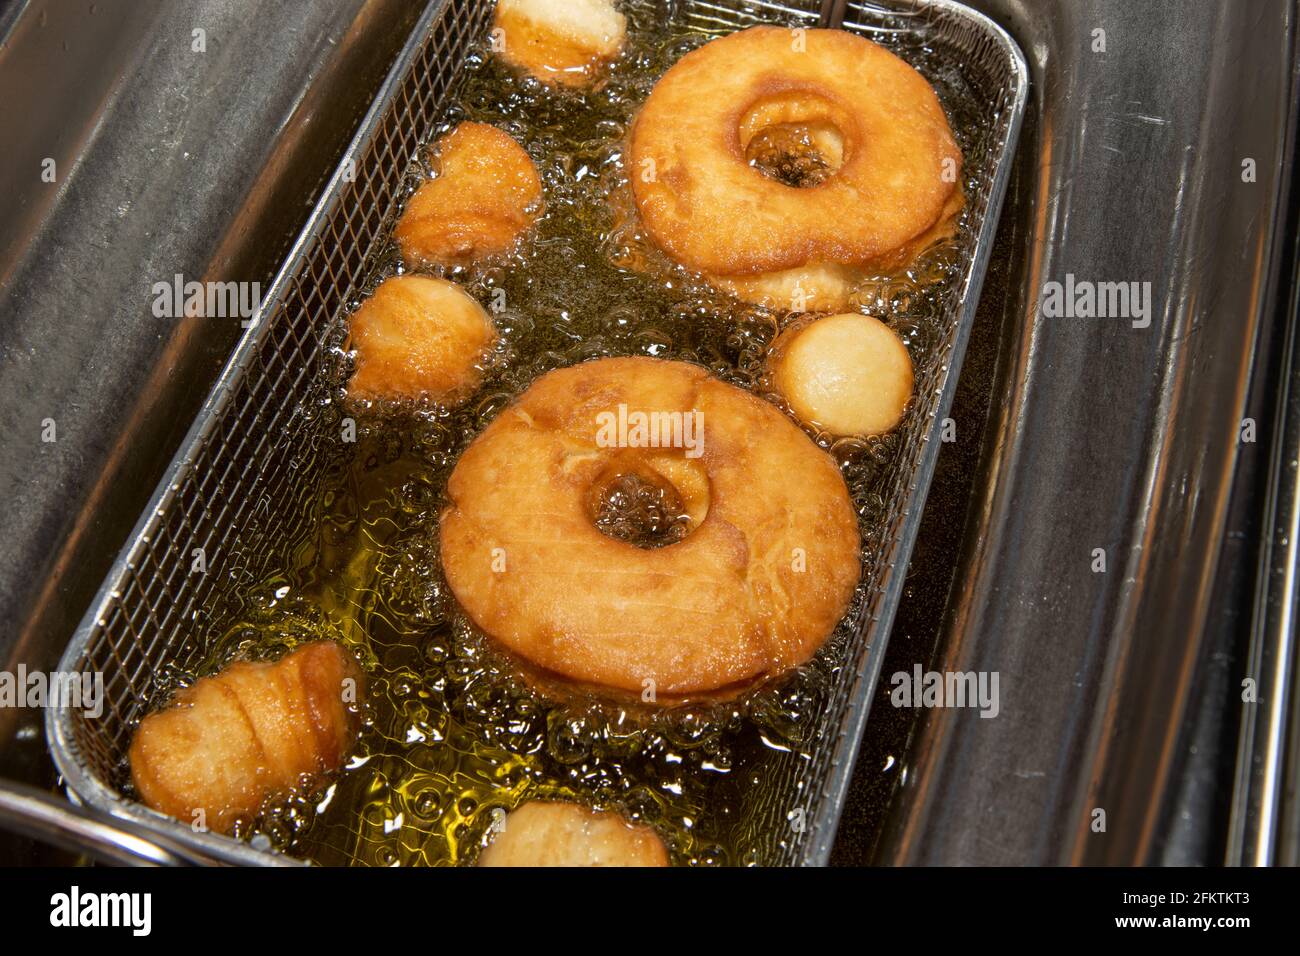 Delicious doughnuts and doughnut holes being cooked in a oil fryer showing the delicious snack frying in oil Stock Photo